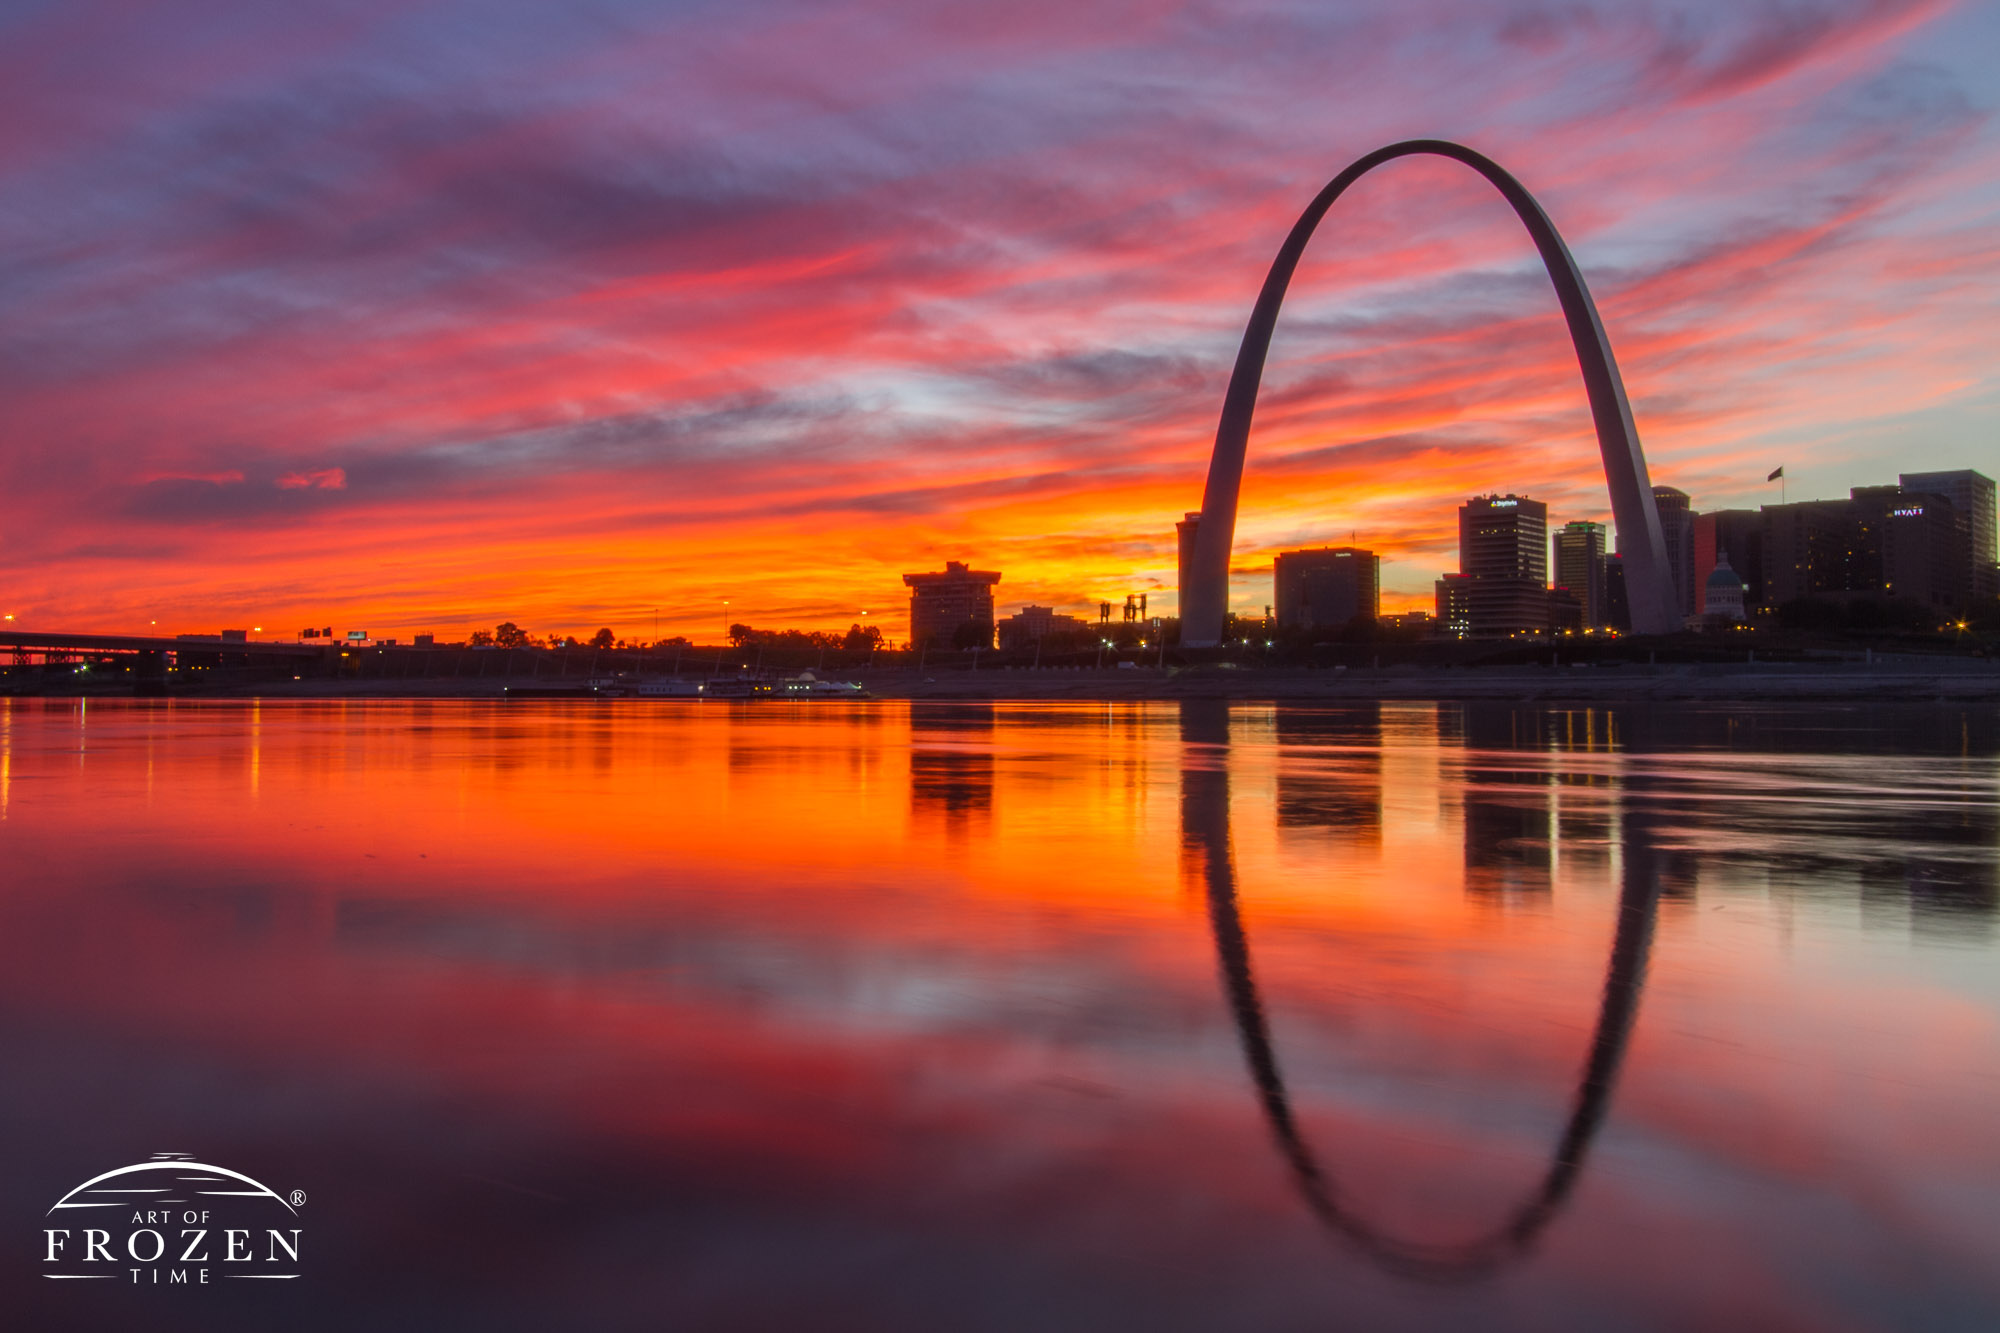 The St Louis Skyline appear to be on fire following an unusually colorful sunset thanks to the remnants of Hurricane Patricia